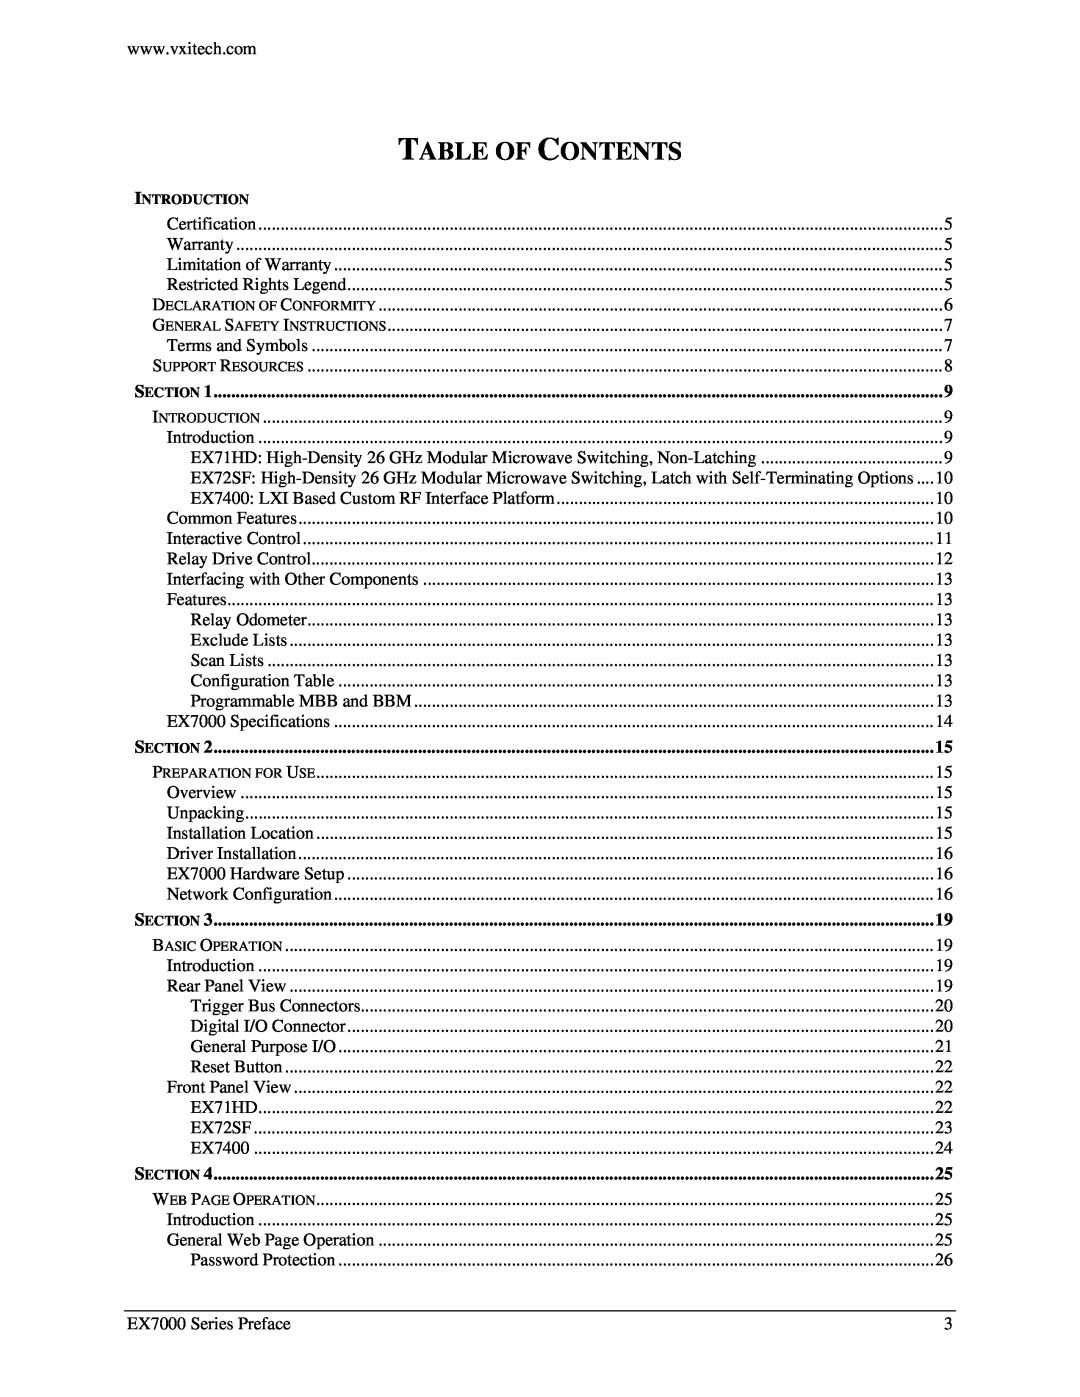 VXI EX7000 user manual Table Of Contents, S Ection 